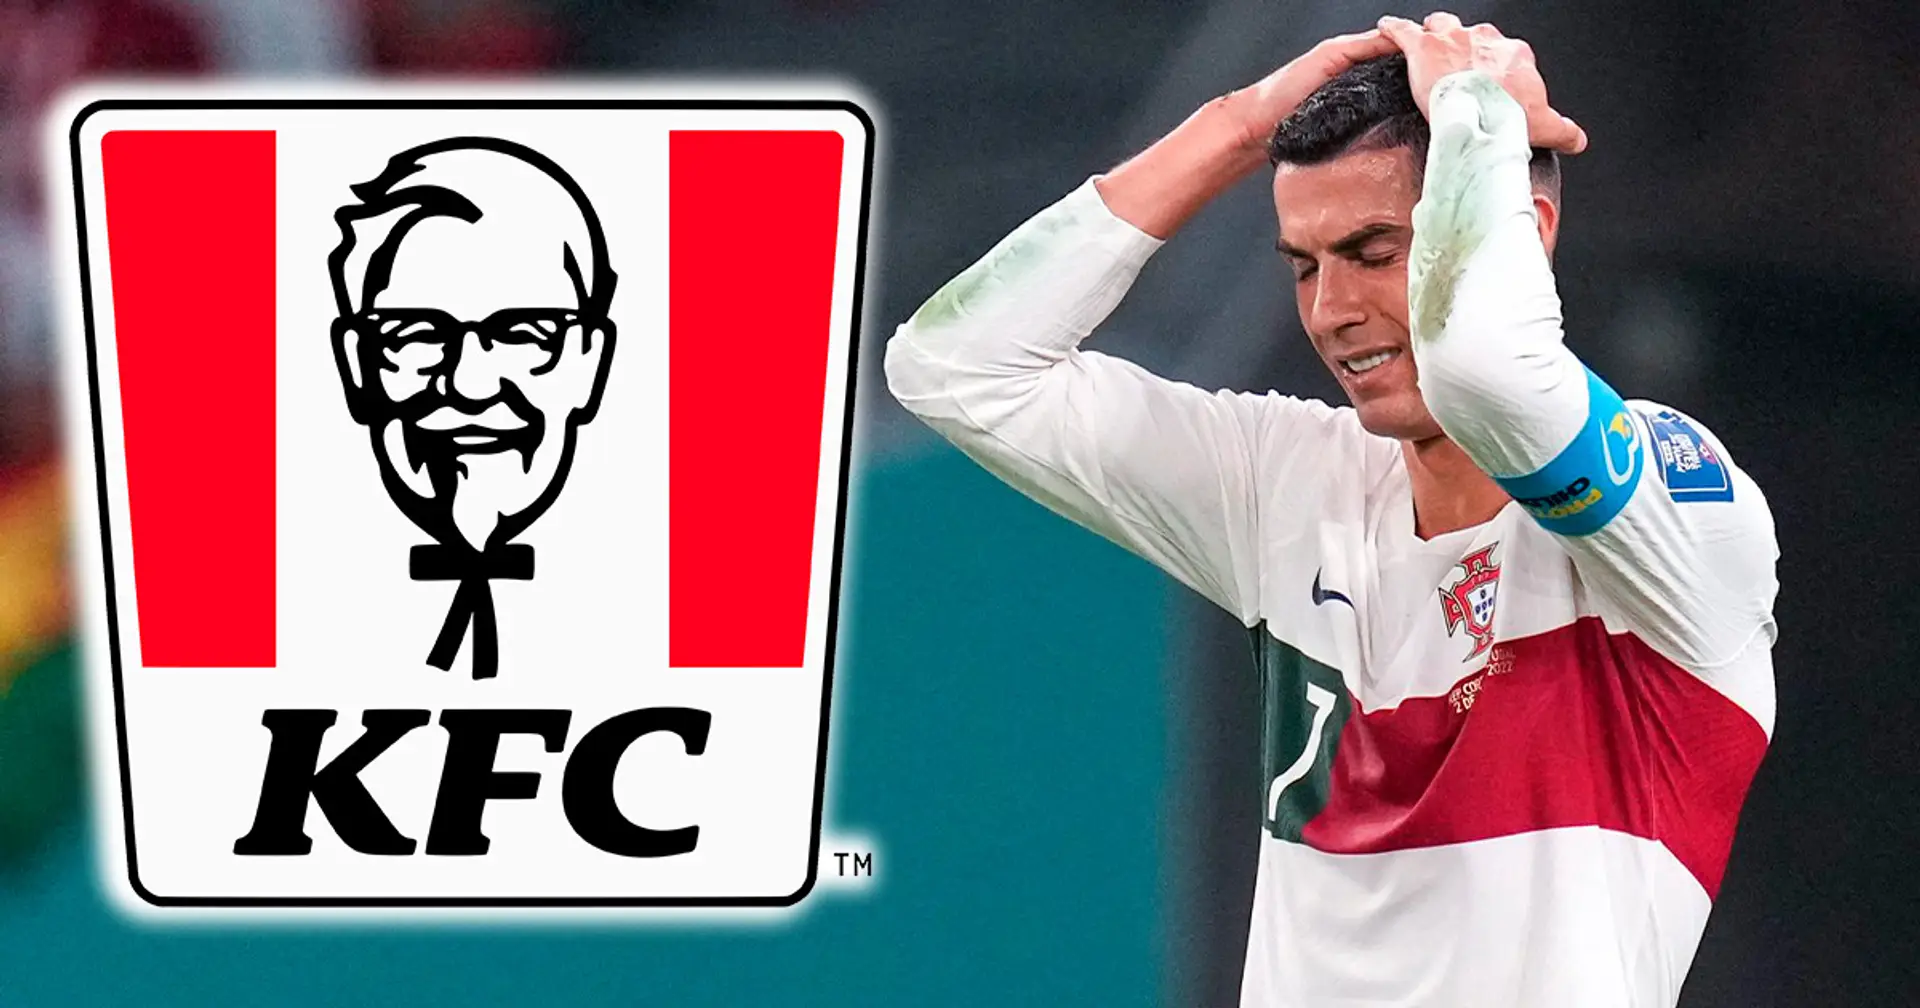 Cristiano Ronaldo savagely mocked by KFC after 'agreeing' €200m-a-year contract with Al-Nassr